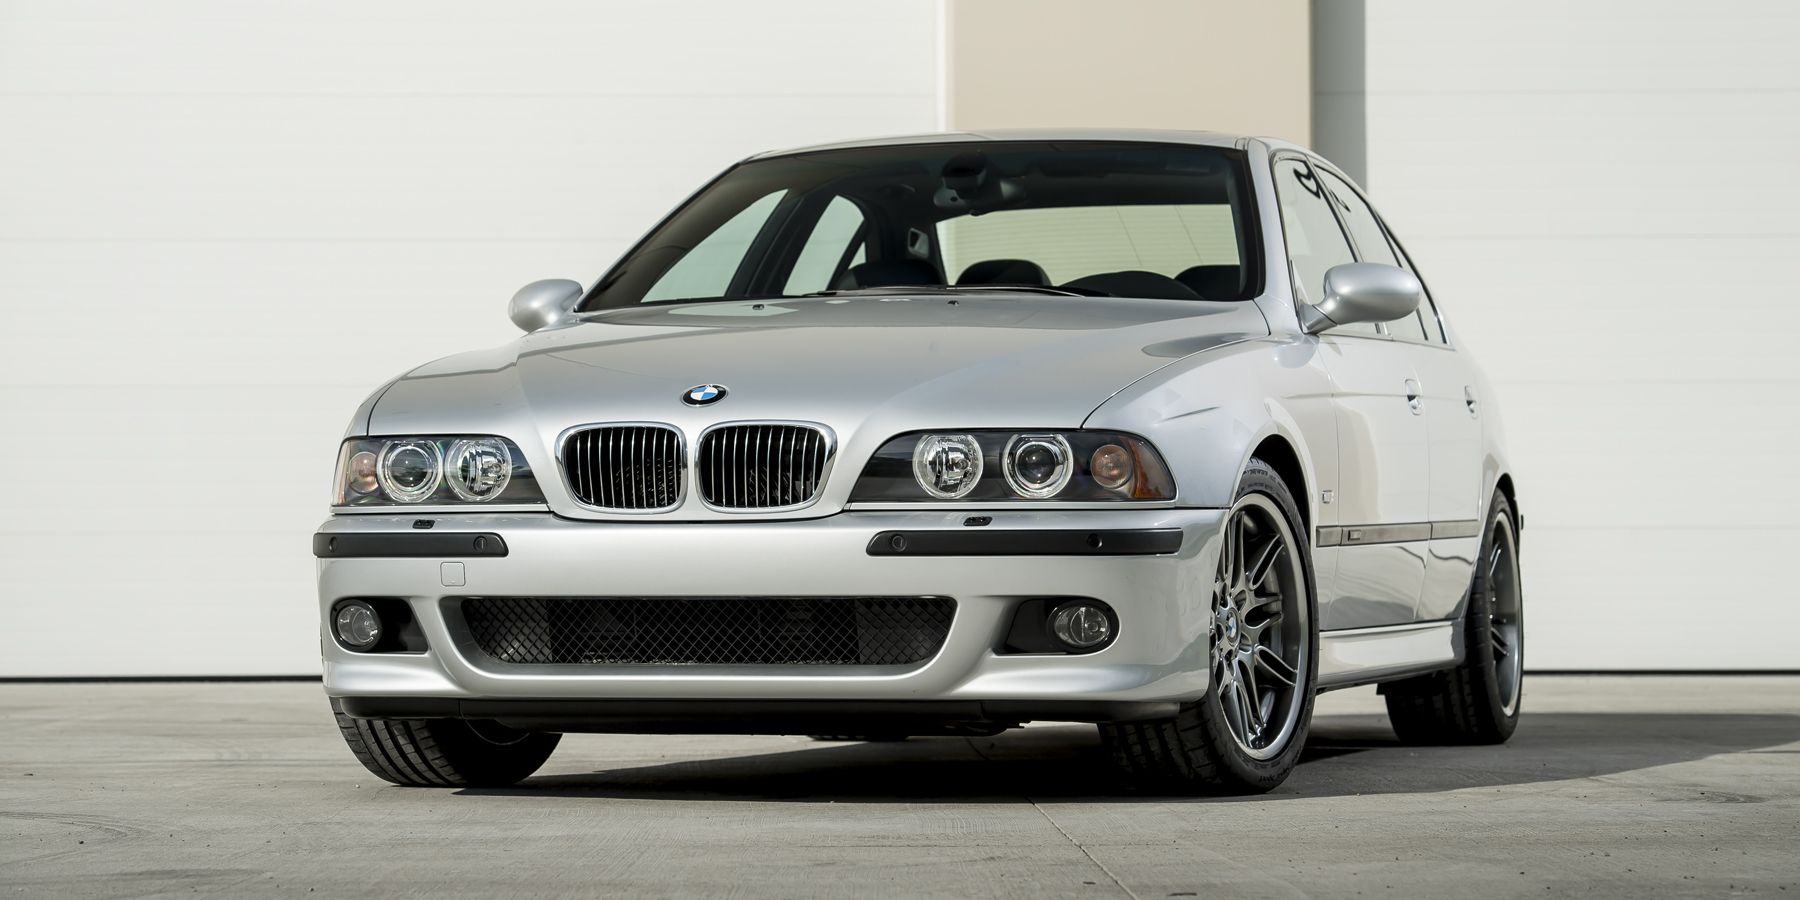 Bring a Trailer on X: Sold: 2002 BMW M5 for $21,000.